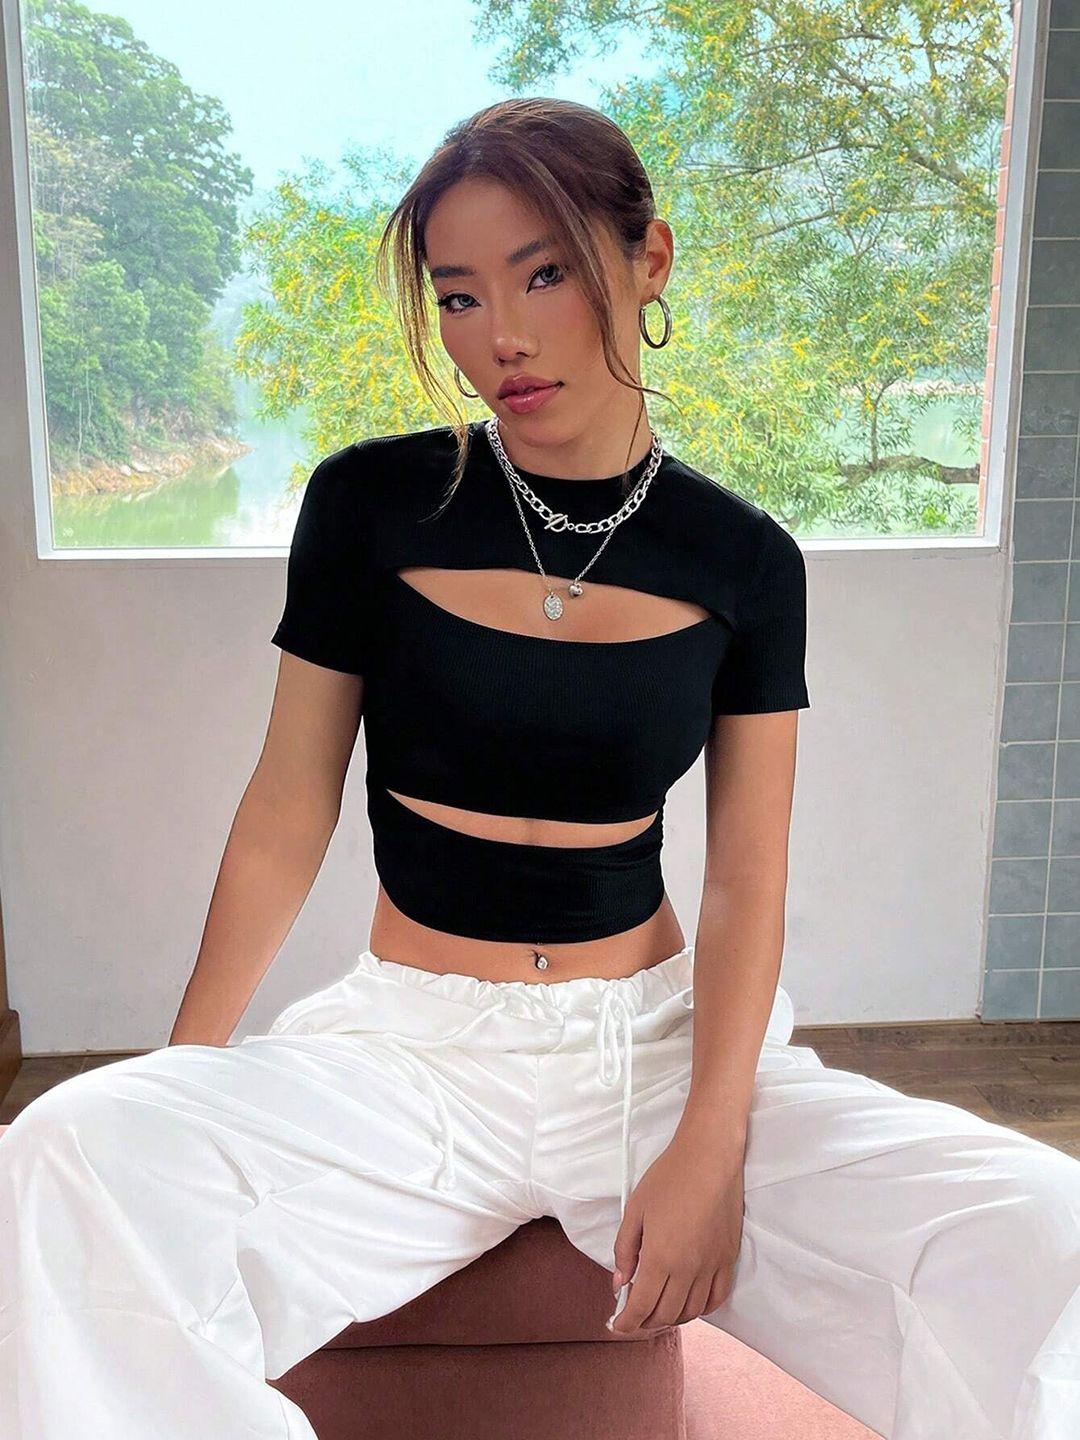 stylecast x slyck round neck cut out fitted crop top